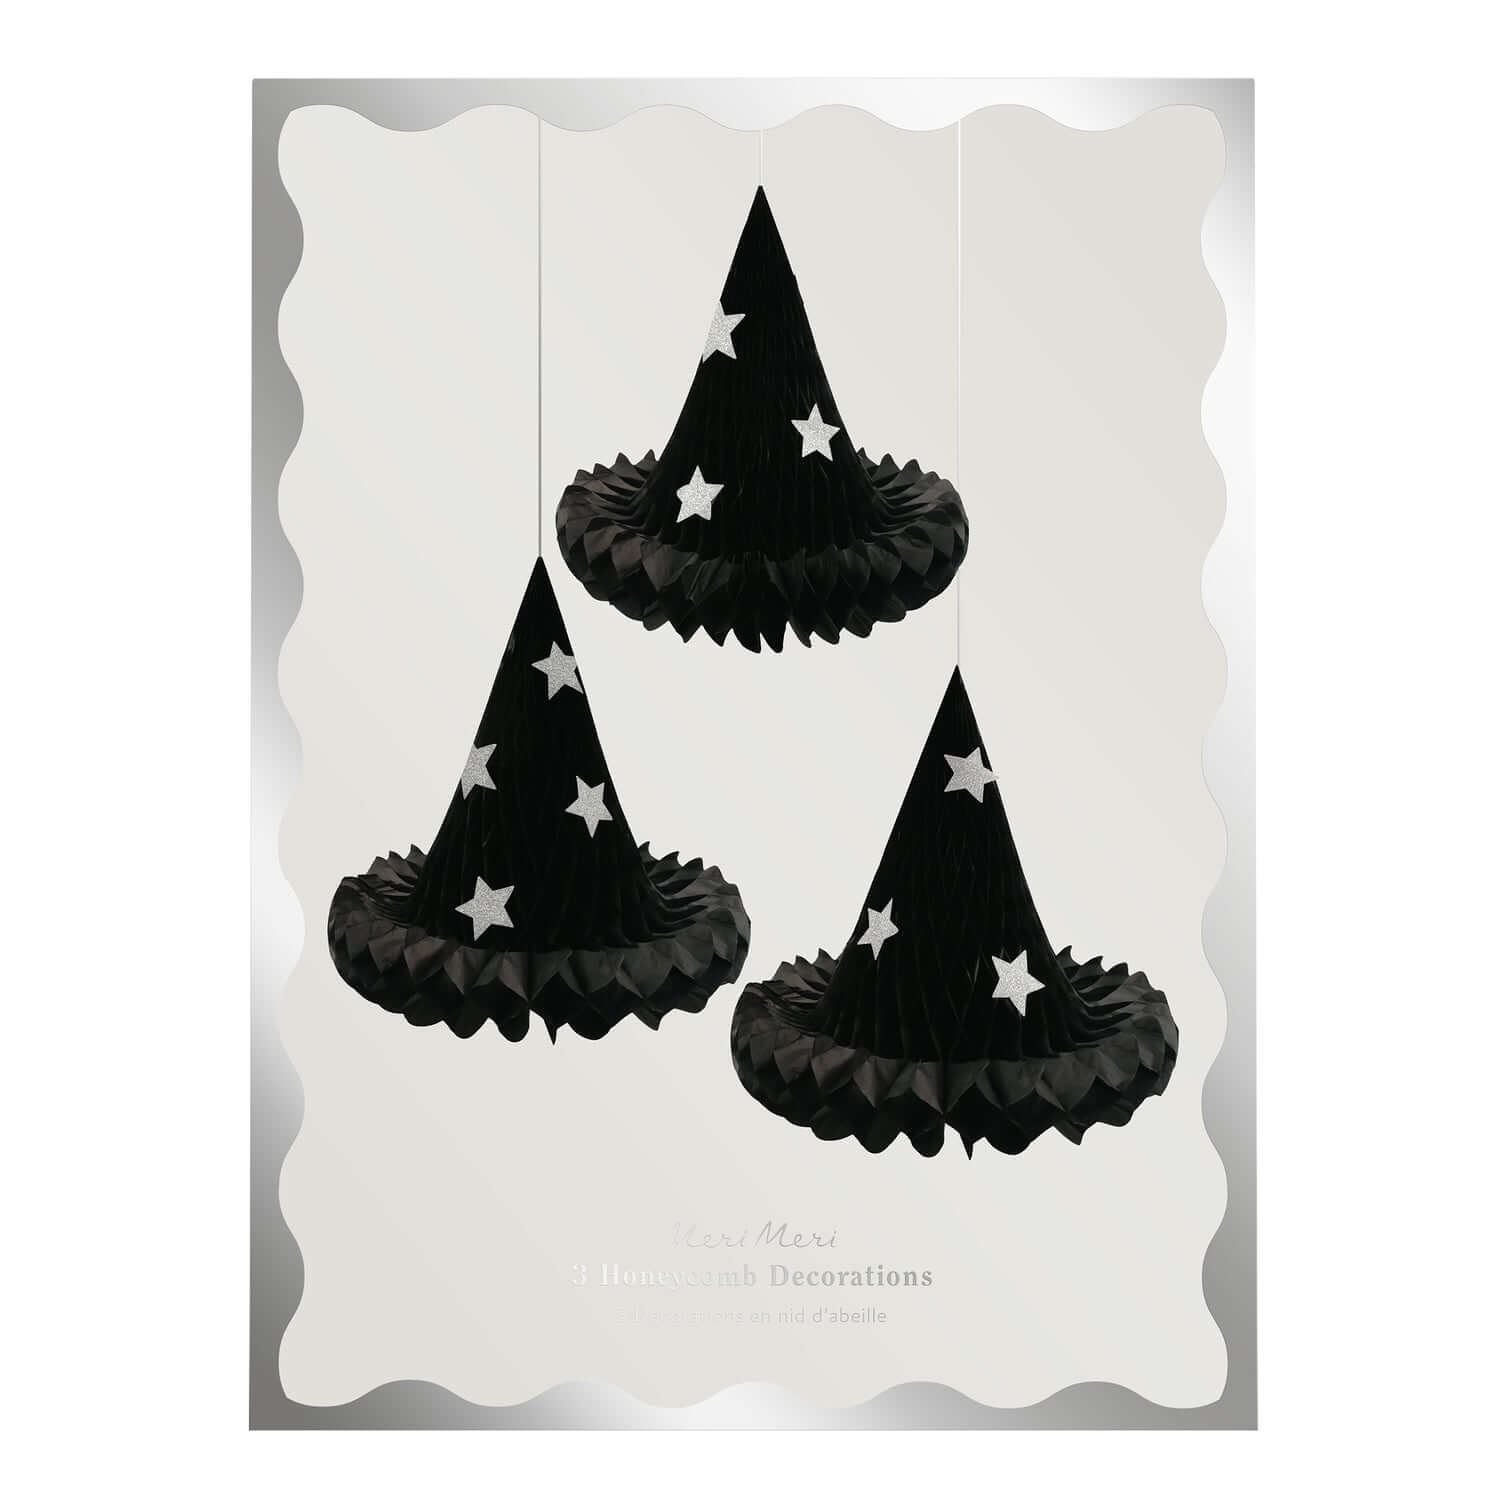 Package of Meri Meri Hanging Honeycomb Witch Hat Decorations, Sale by Momo Party. This 13.25" x 12.875" Witch Hat Hanging Decorations made by tissue paper honeycomb witch hats, with silver paper clips to hold them open. Whether they are hanging in your home, or gently swaying in your porch or garden, these versatile witch hats will delight all visitors on Halloween. The glitter stars will shine brightly to mesmerize your guests too.